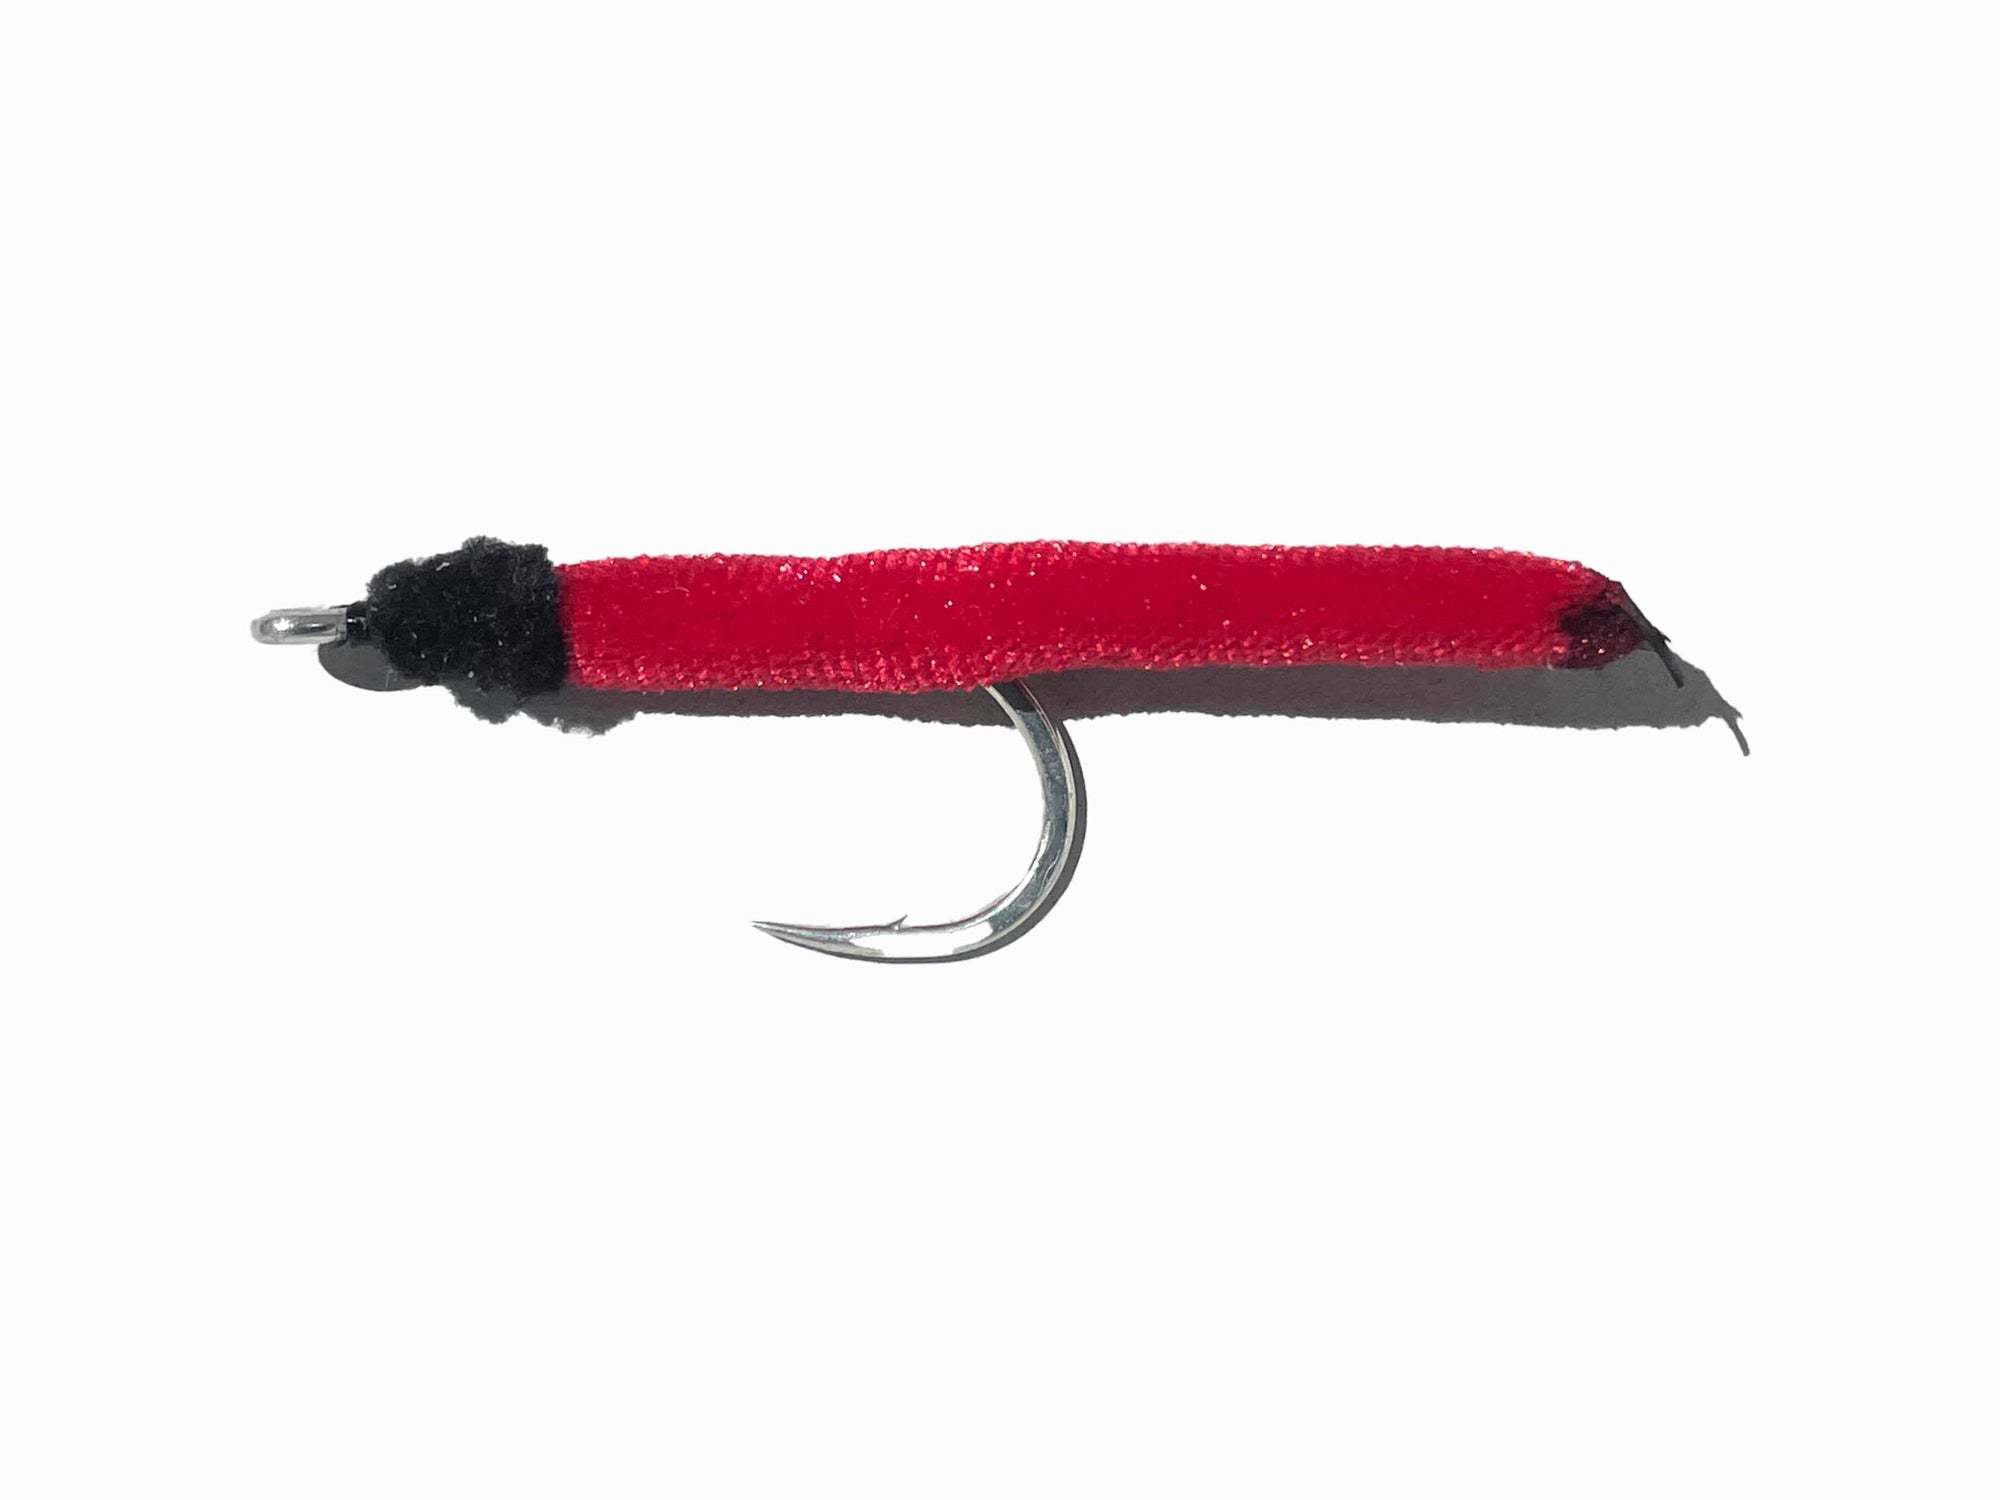 Fly Fishing Tagged saltwater fly - The Saltwater Edge